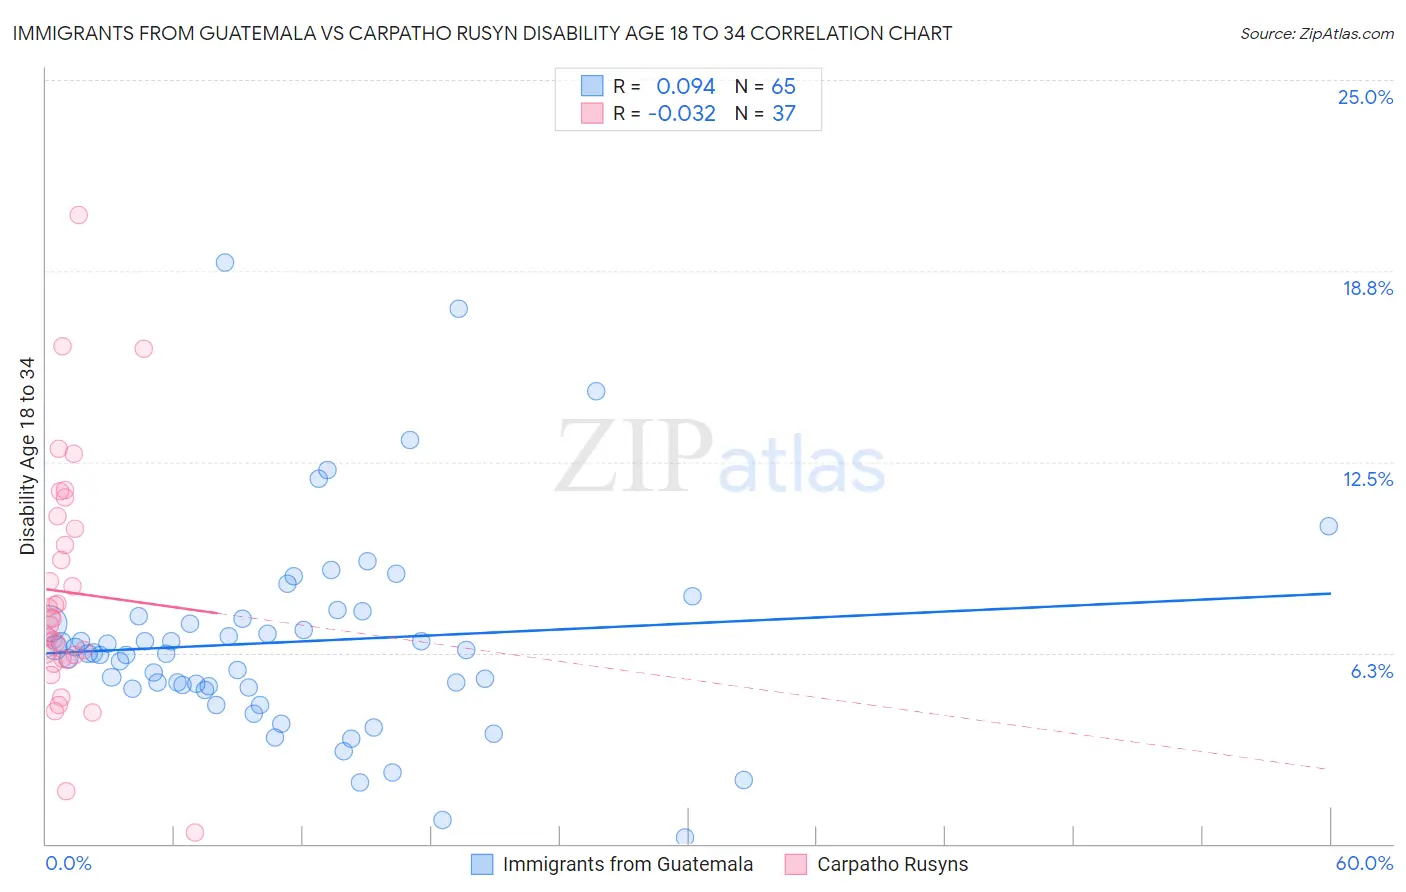 Immigrants from Guatemala vs Carpatho Rusyn Disability Age 18 to 34